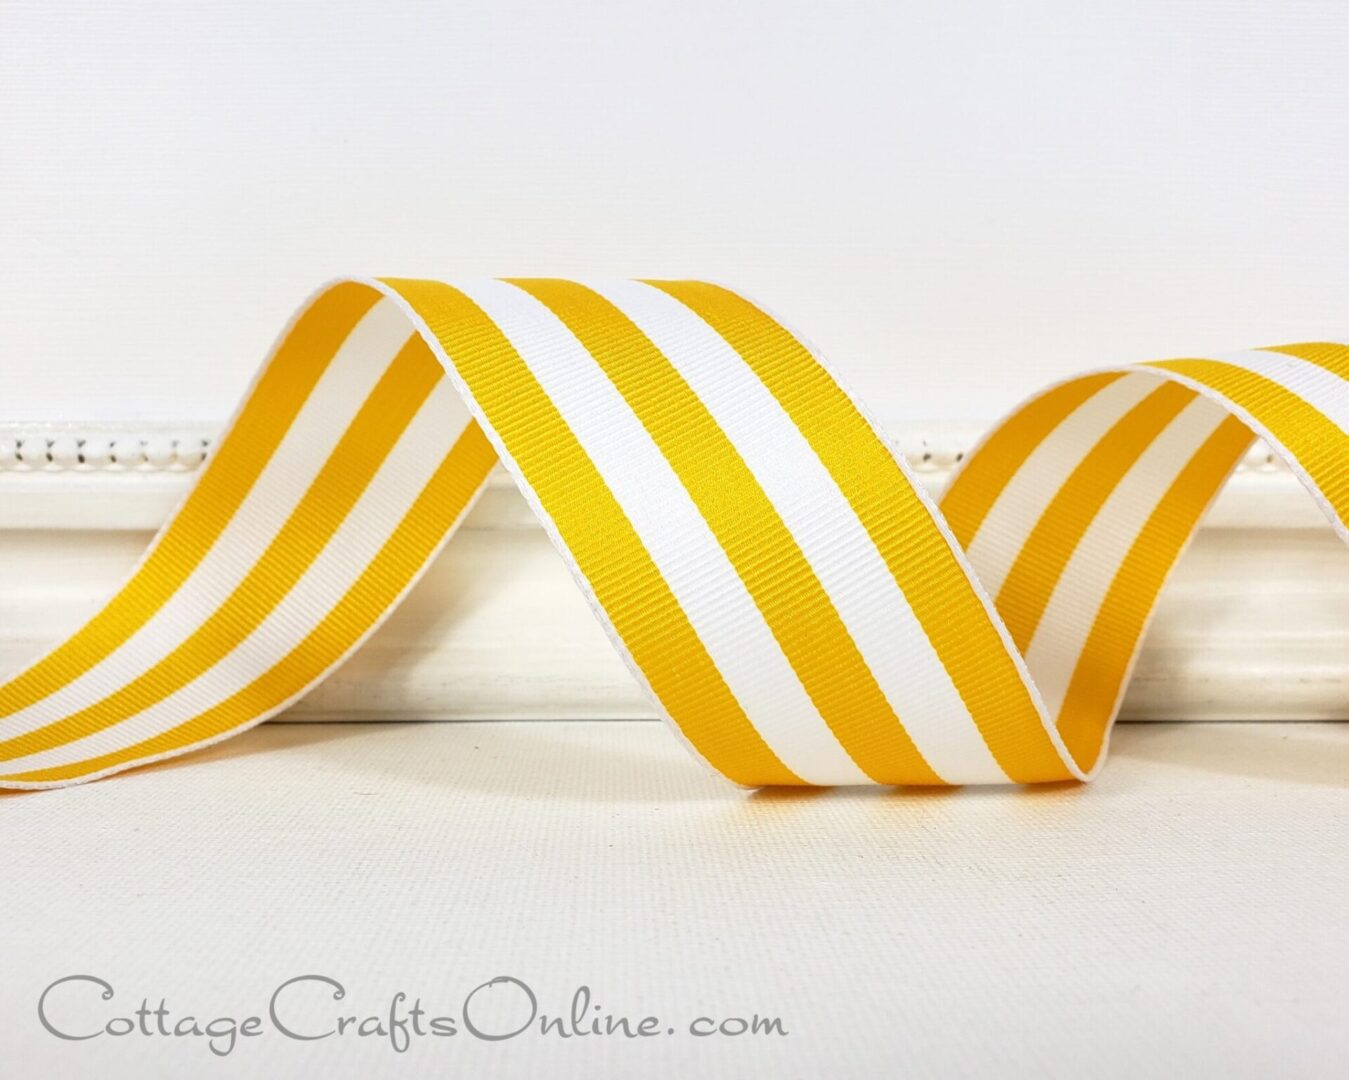 Bright yellow and white carnival stripes 1.5" wide wired ribbon from the Etsy shop of Cottage Crafts Online.